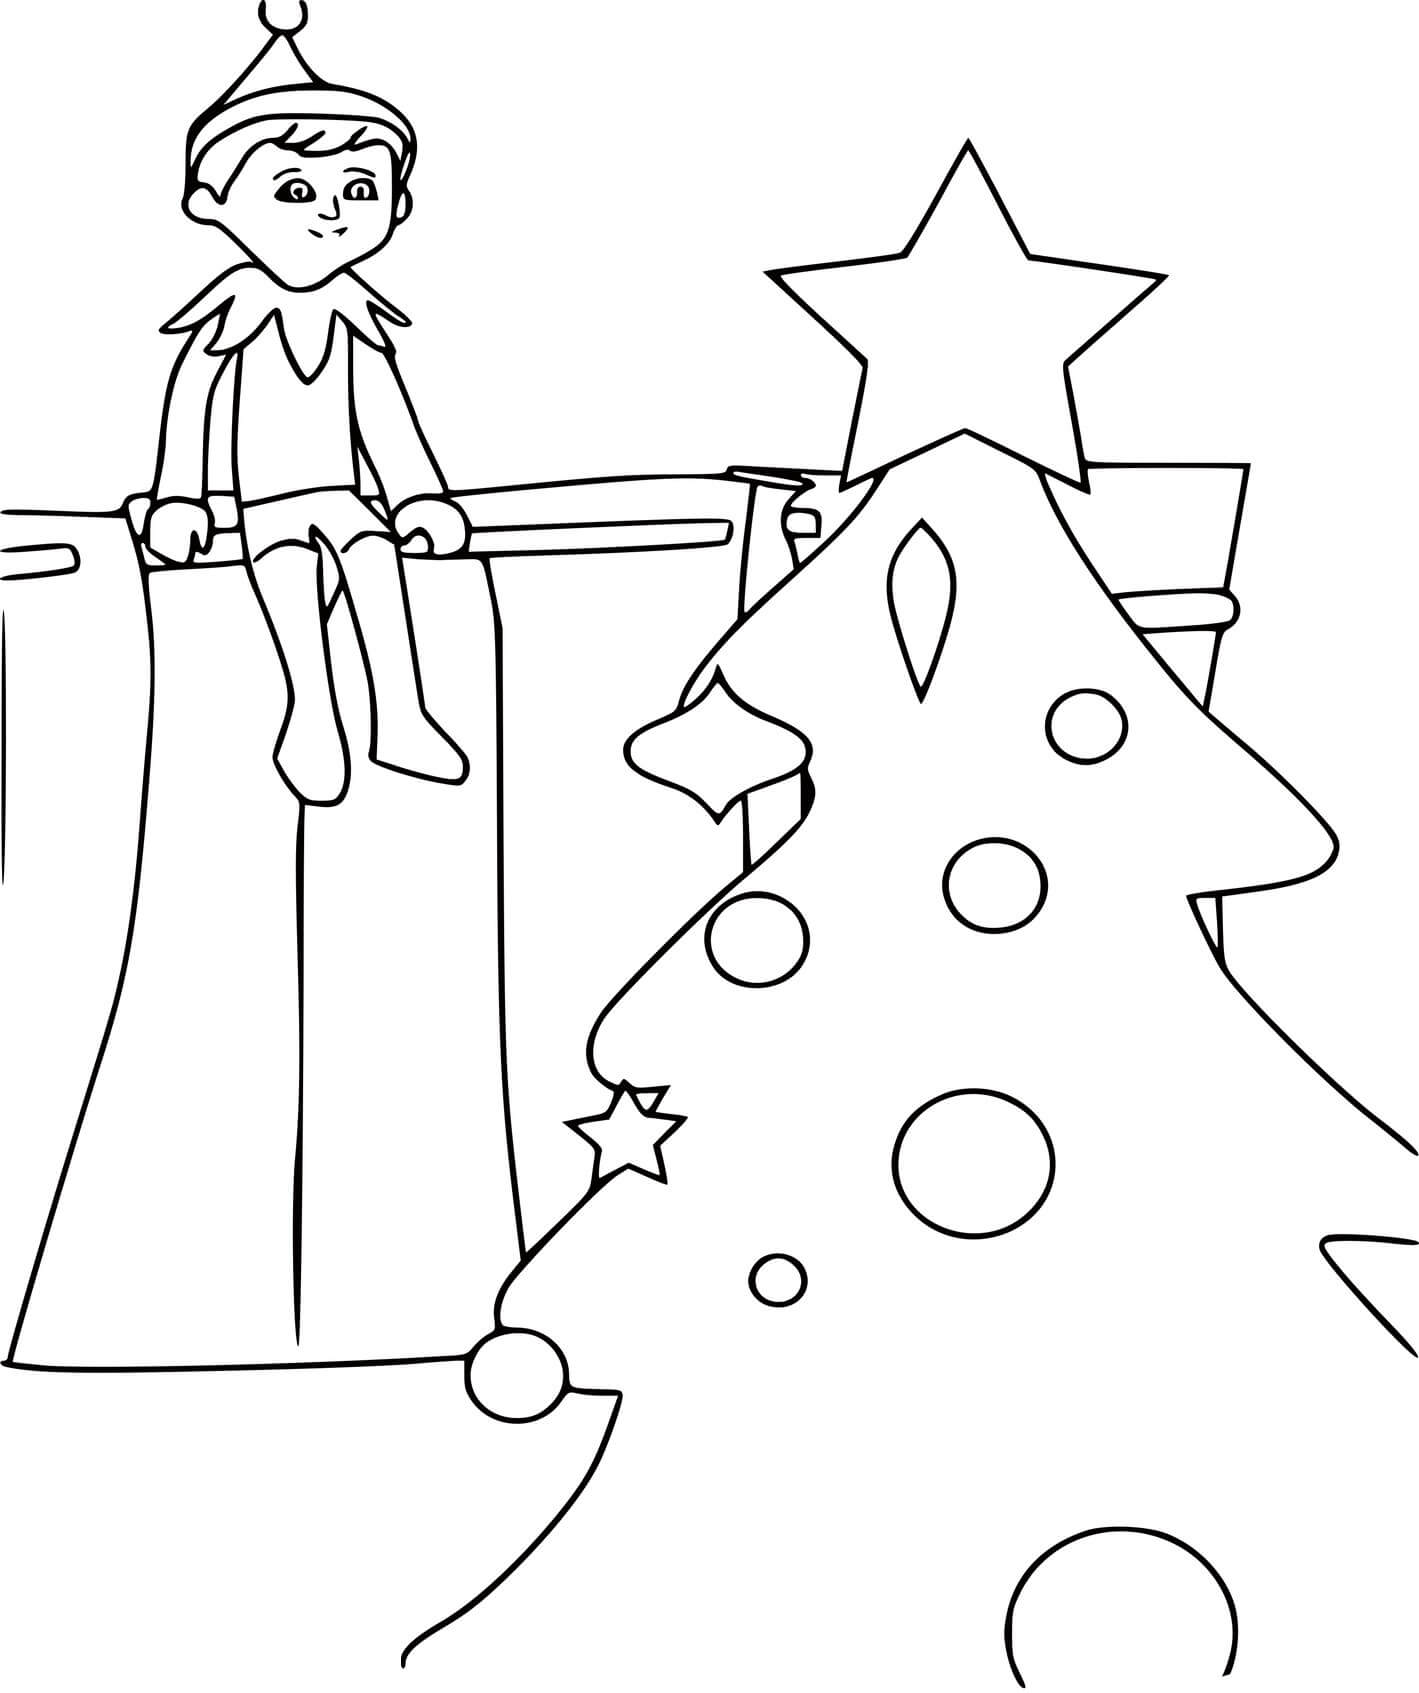 Elf On The Shelf With A Big Christmas Tree Coloring Page